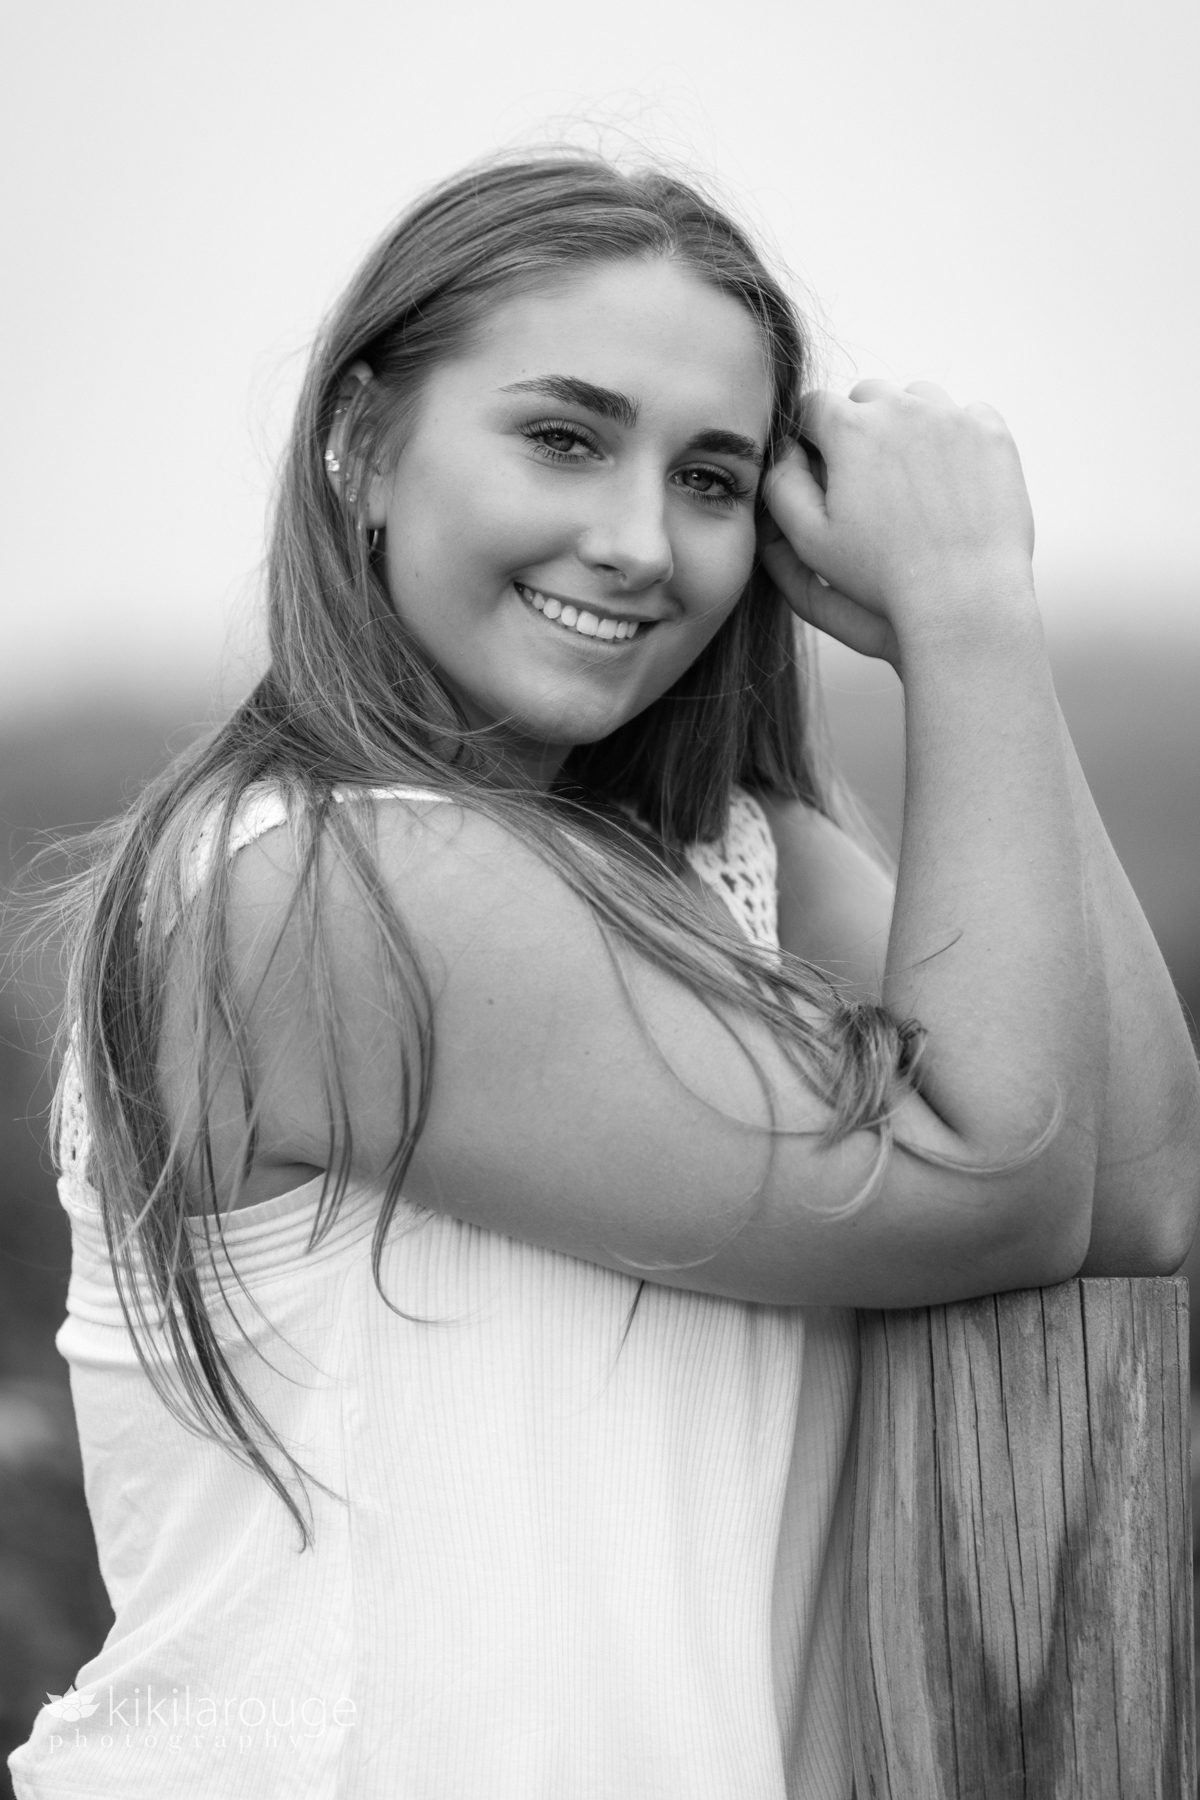 Triton Senior Portrait Girl in Jeans with white top tied in back at beach in Black and white